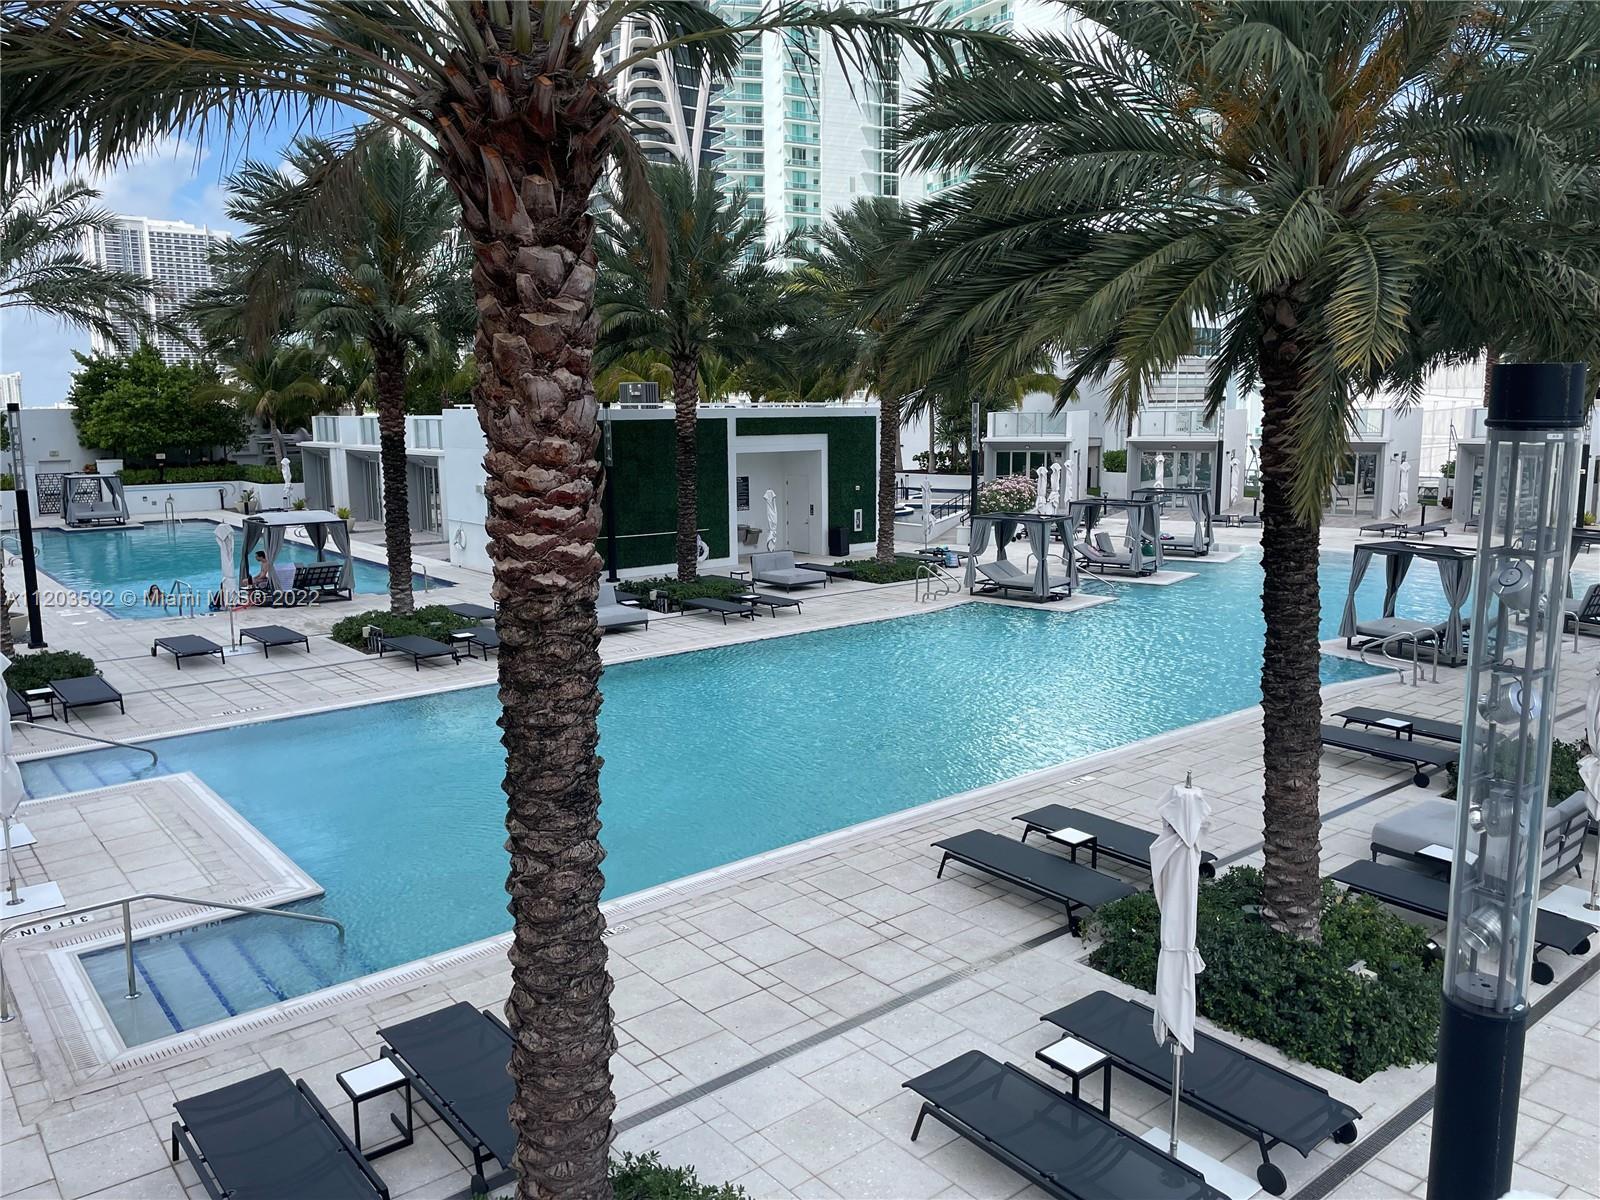 Privately Owned Pool Cabana at the Pool Deck of the Paramount Miami Worldcenter.  Cabana PB 22 has  